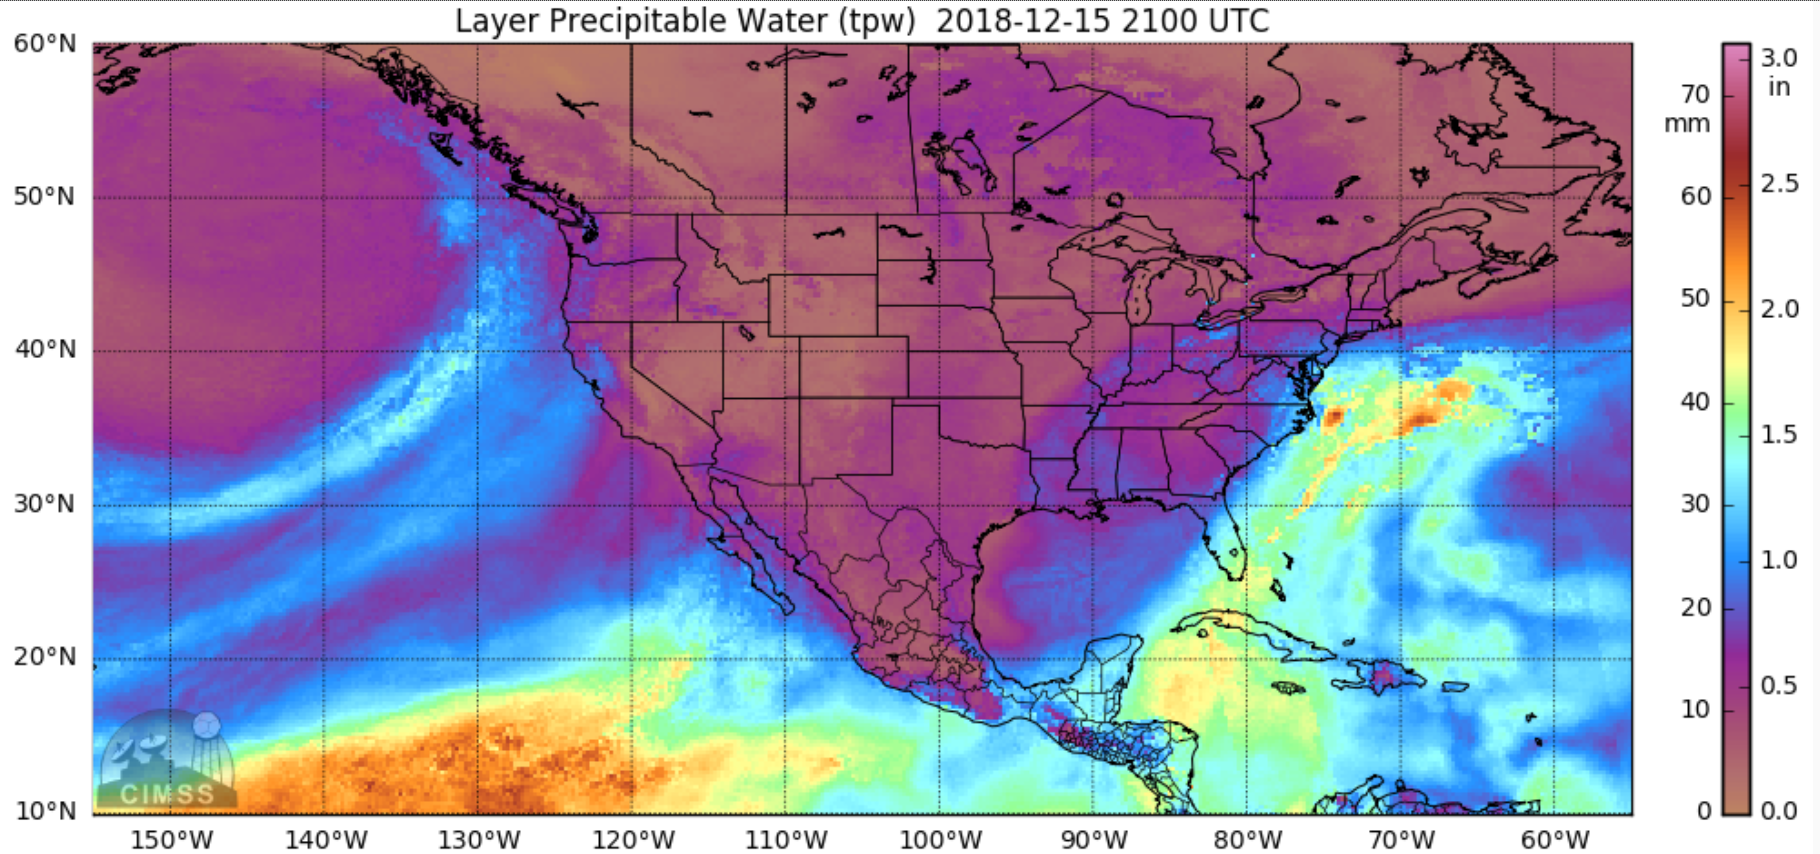 MIMIC Total Precipitable Water product (Total column, and Surface-850 hPa layer) [click to play animation]